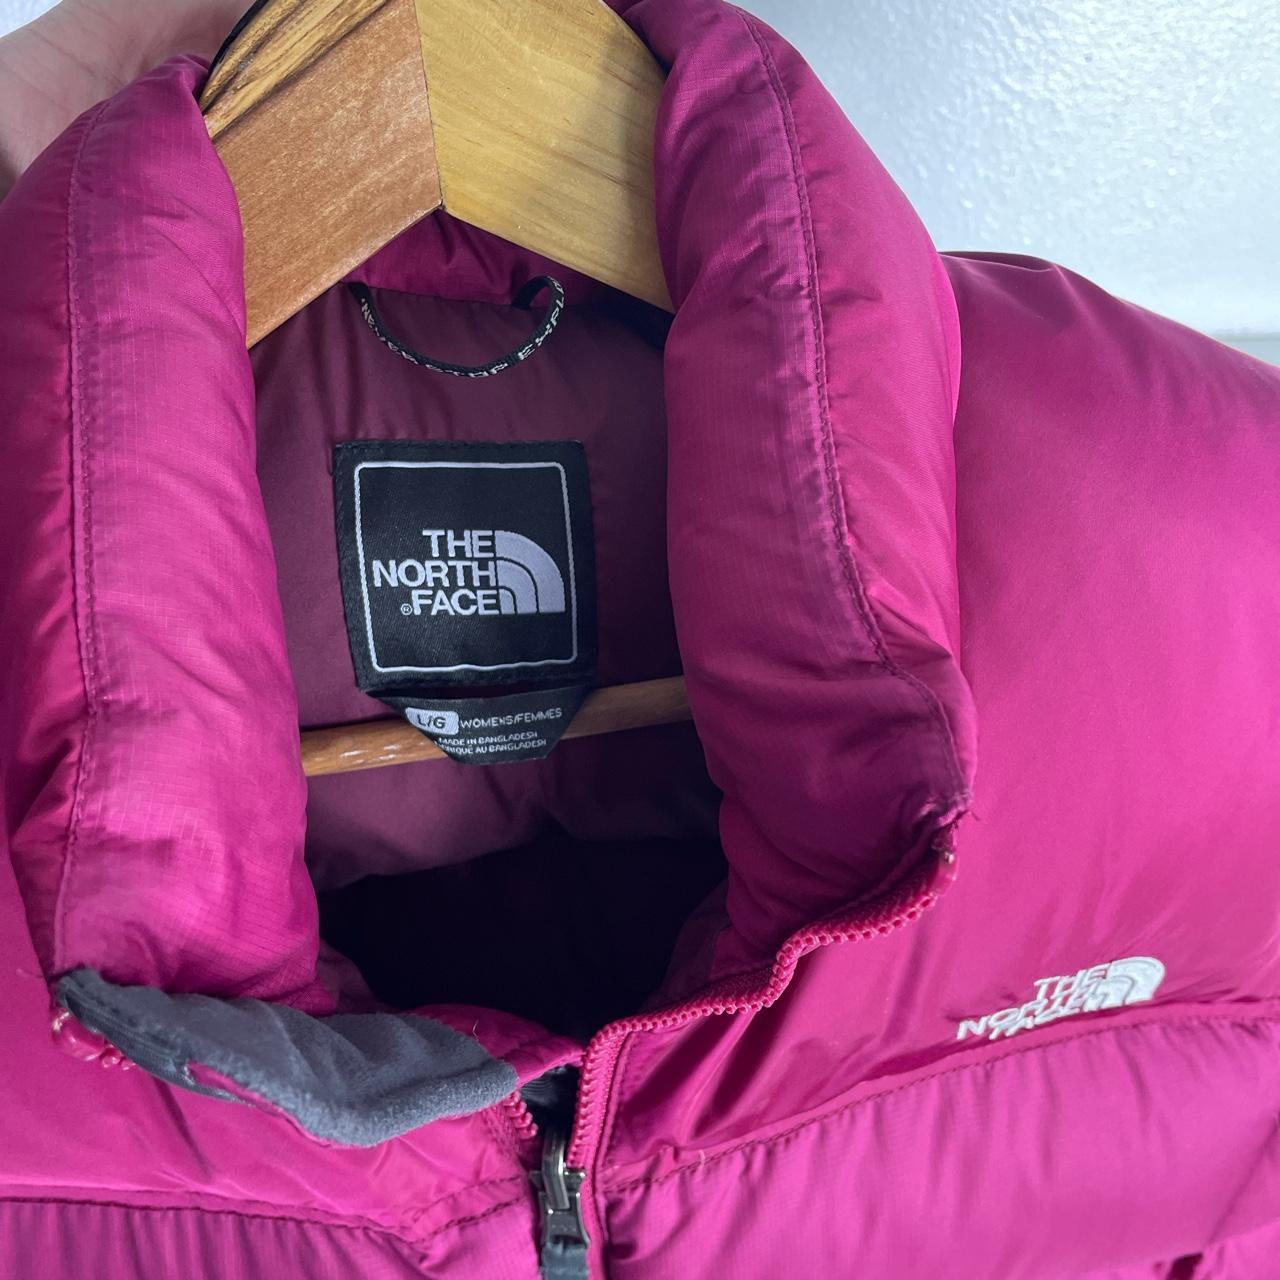 The North Face 700 Purple Puffer Gilet